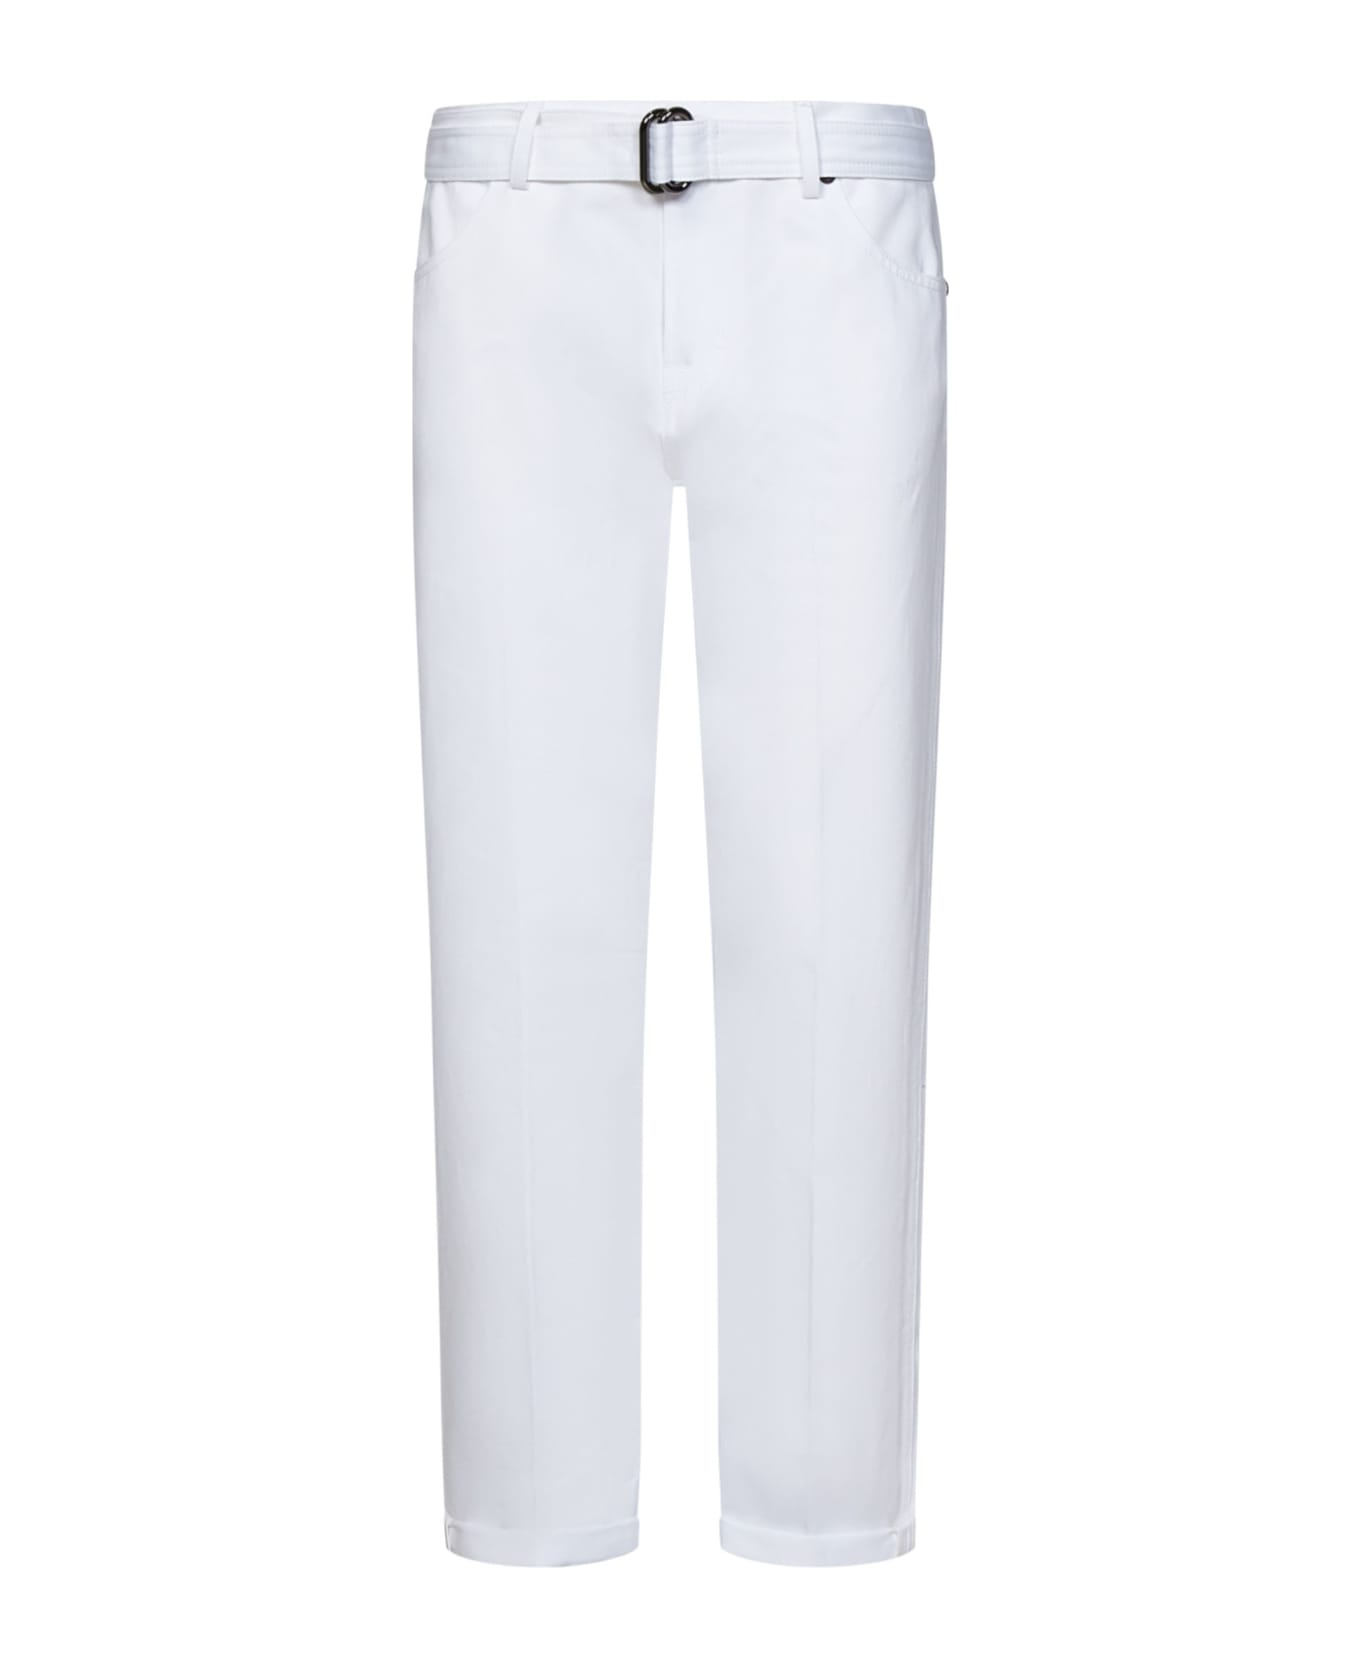 Tom Ford Trousers - White ボトムス